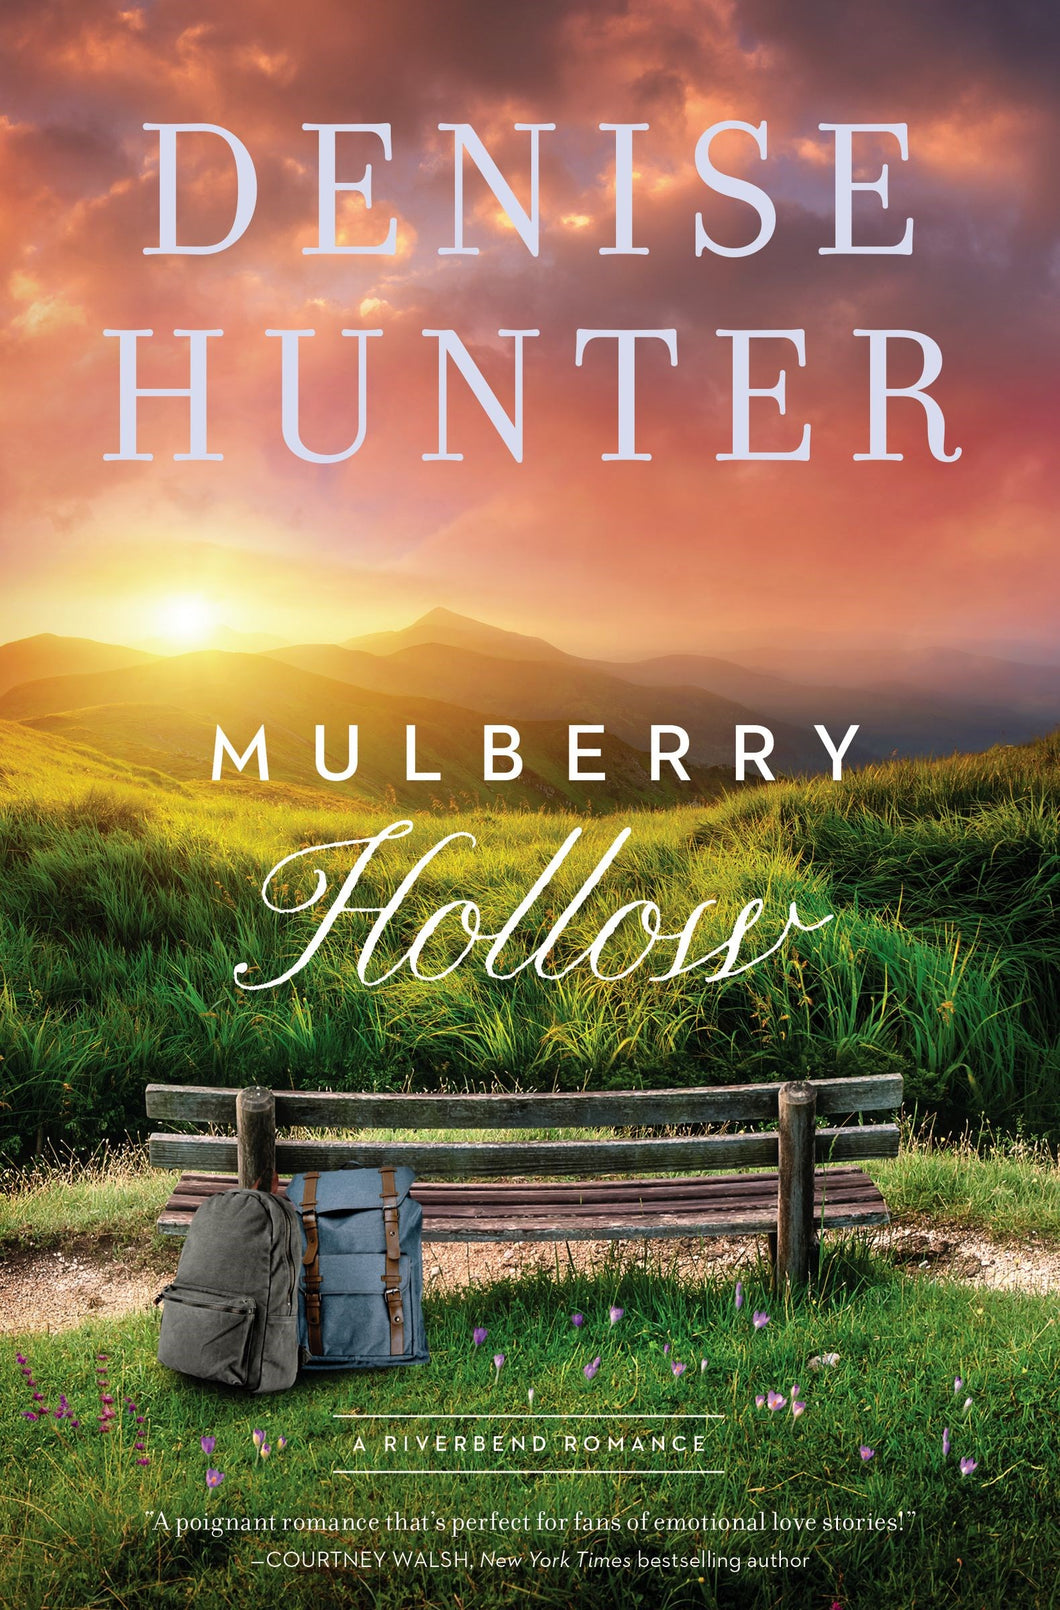 Mulberry Hollow (A Riverbend Romance)